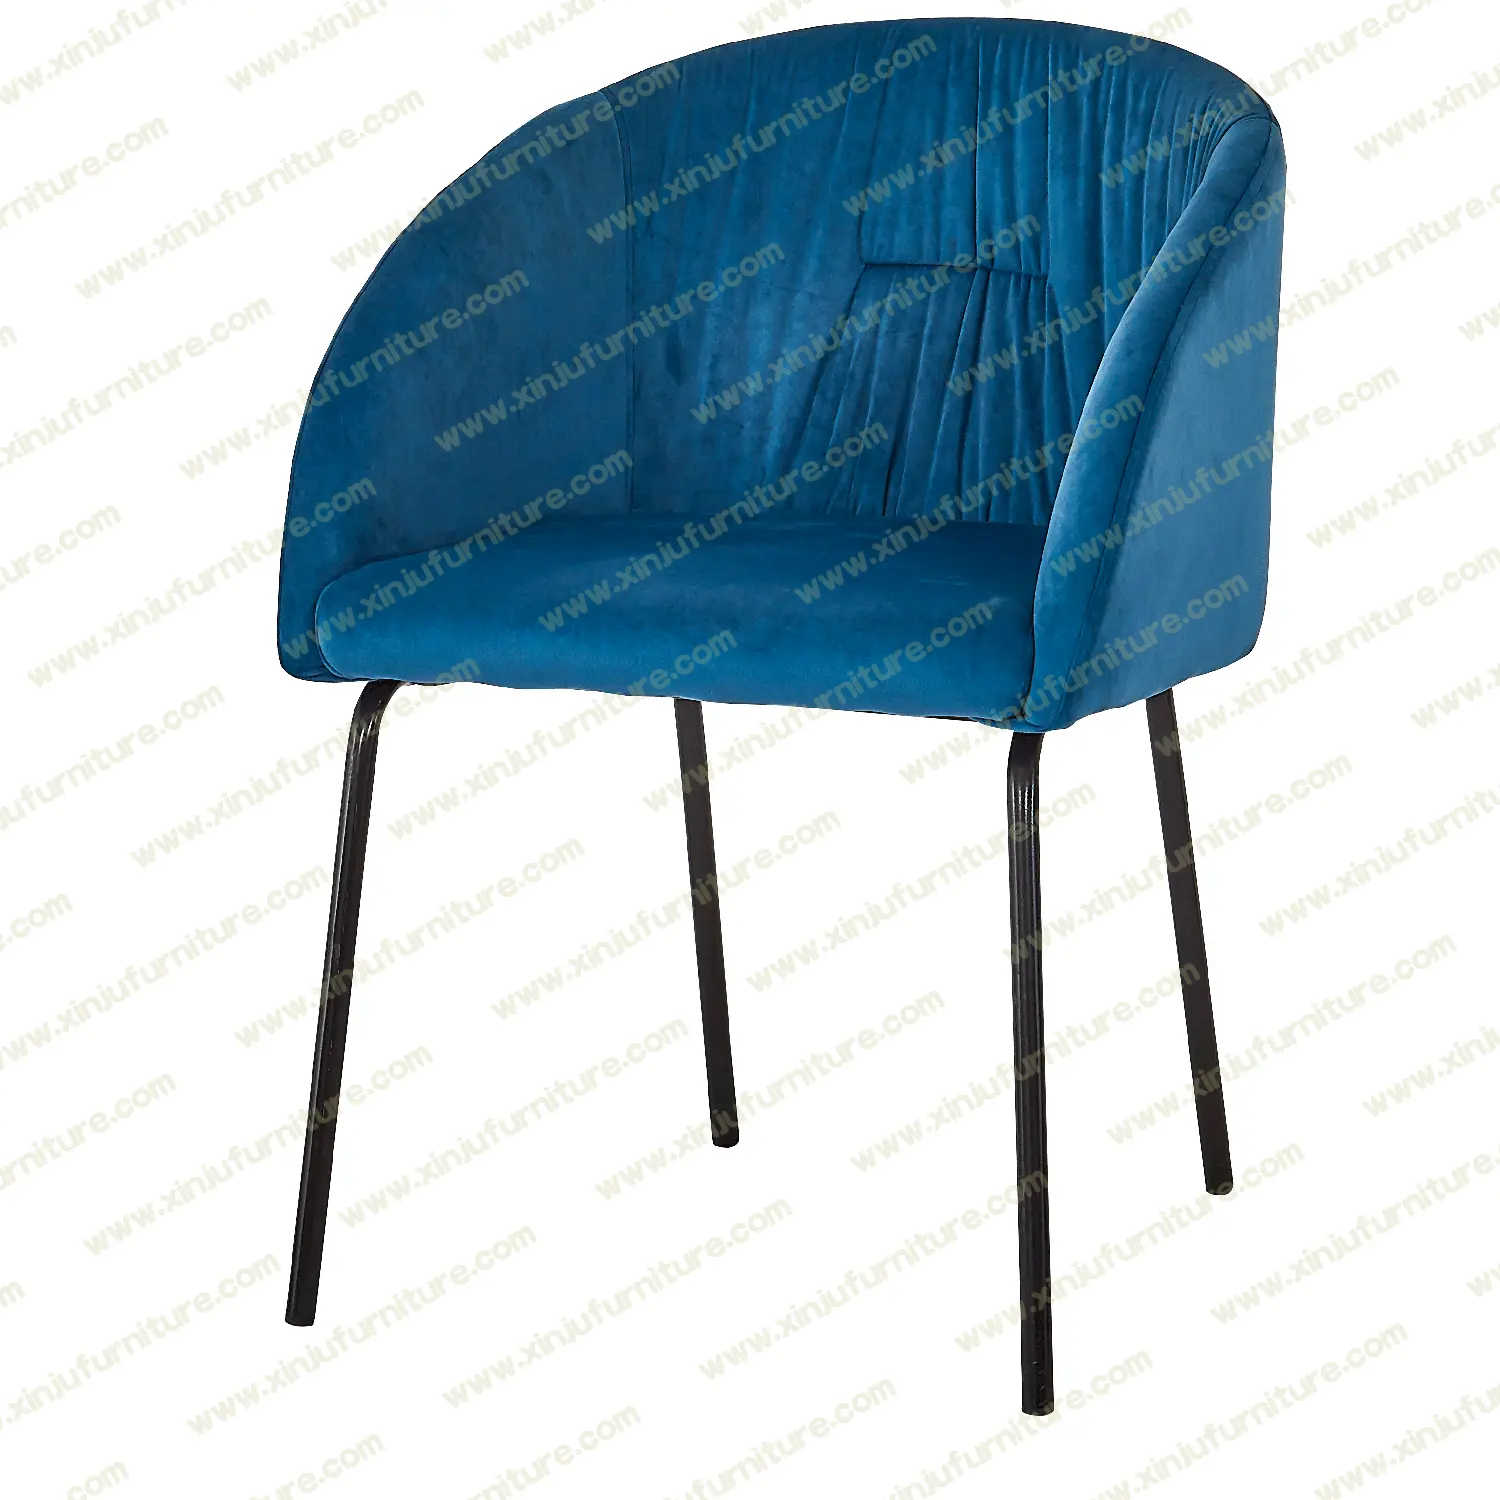 Comfortable and simple tufted dining chair